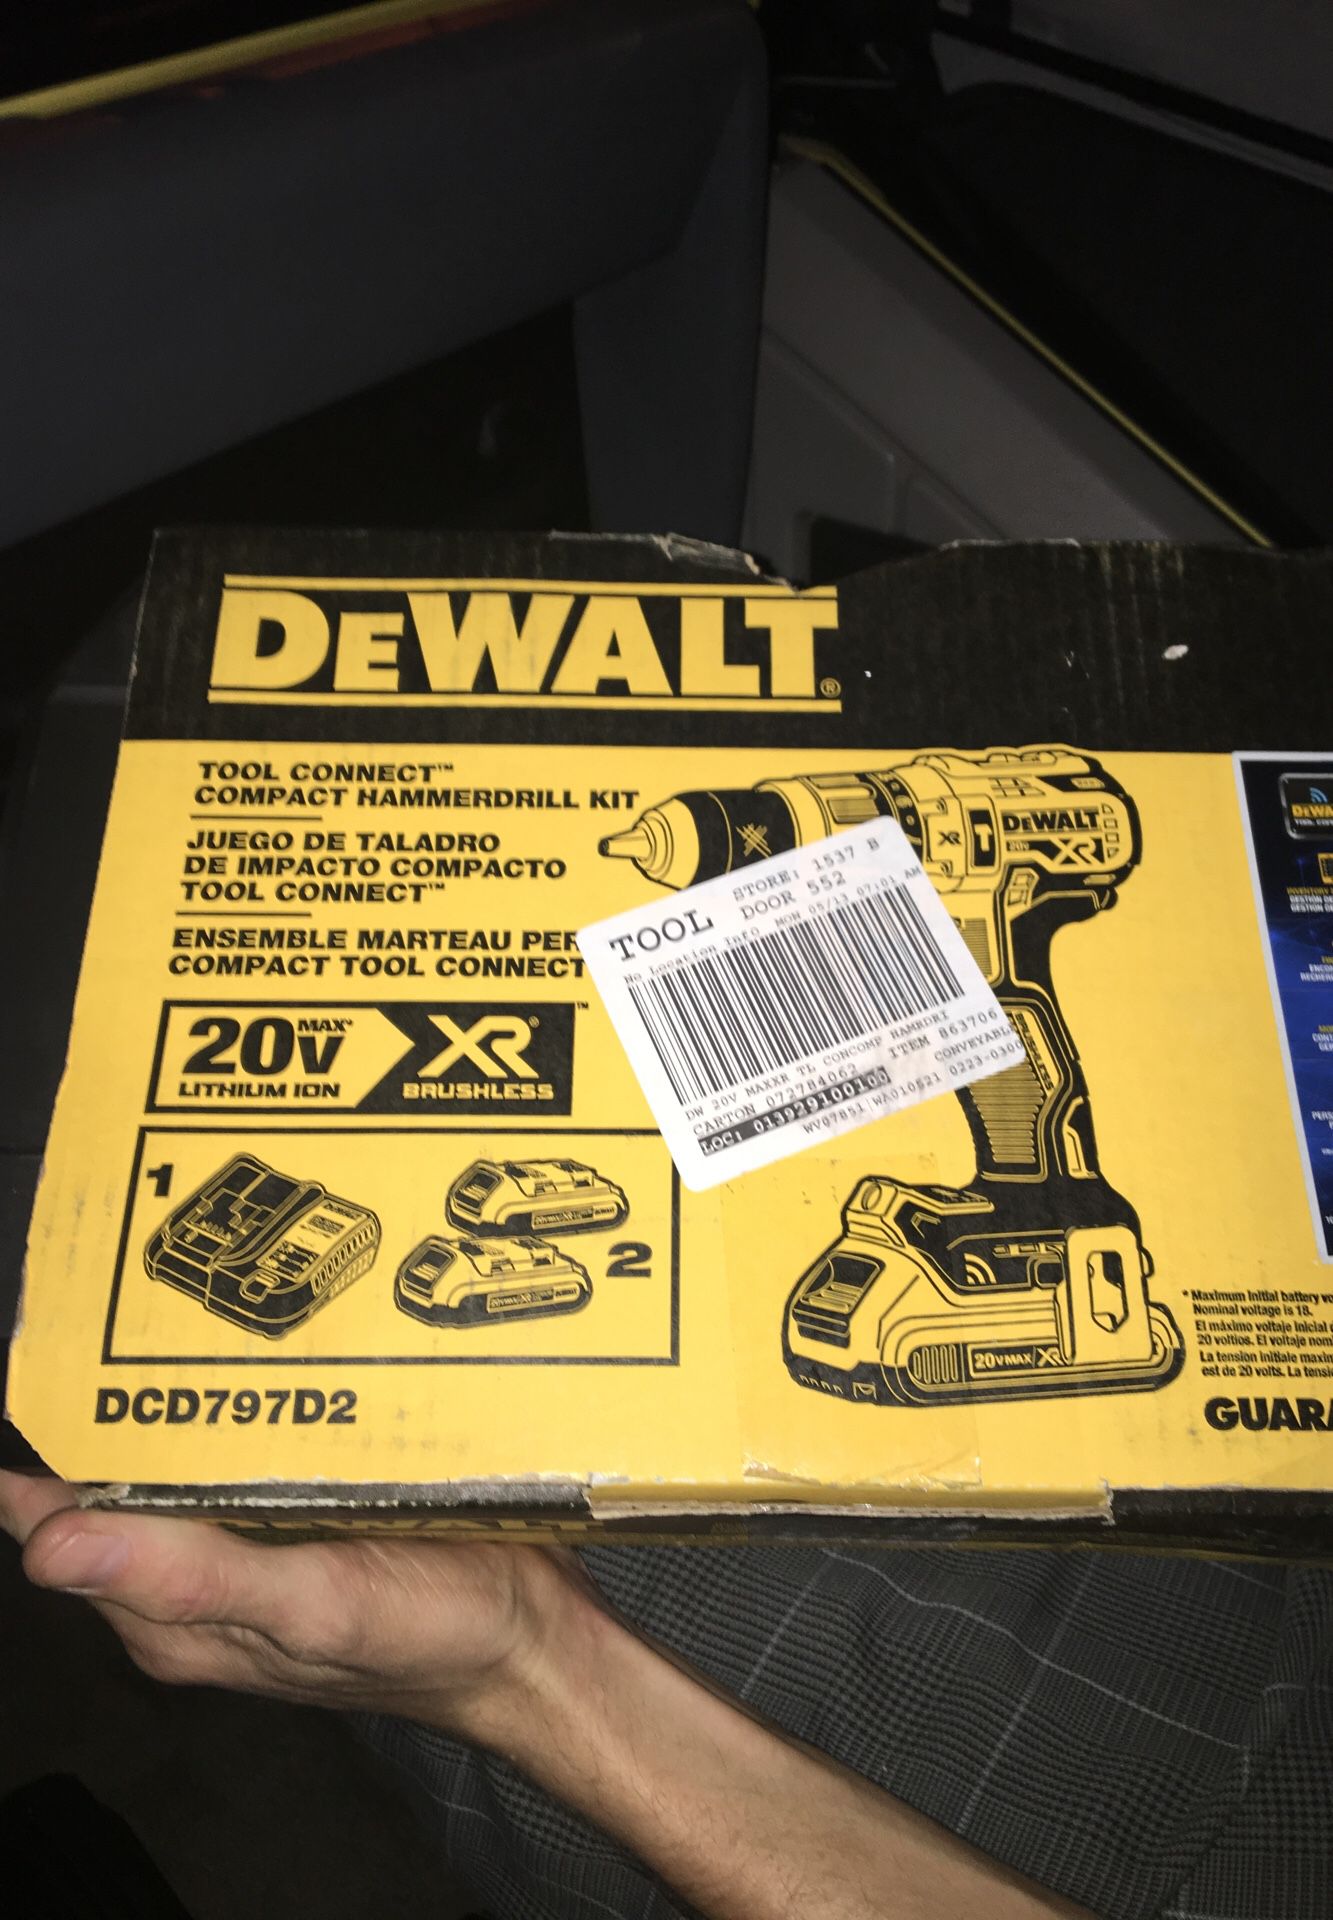 Two Dewalt hammer drill driver’s ... (one compact)